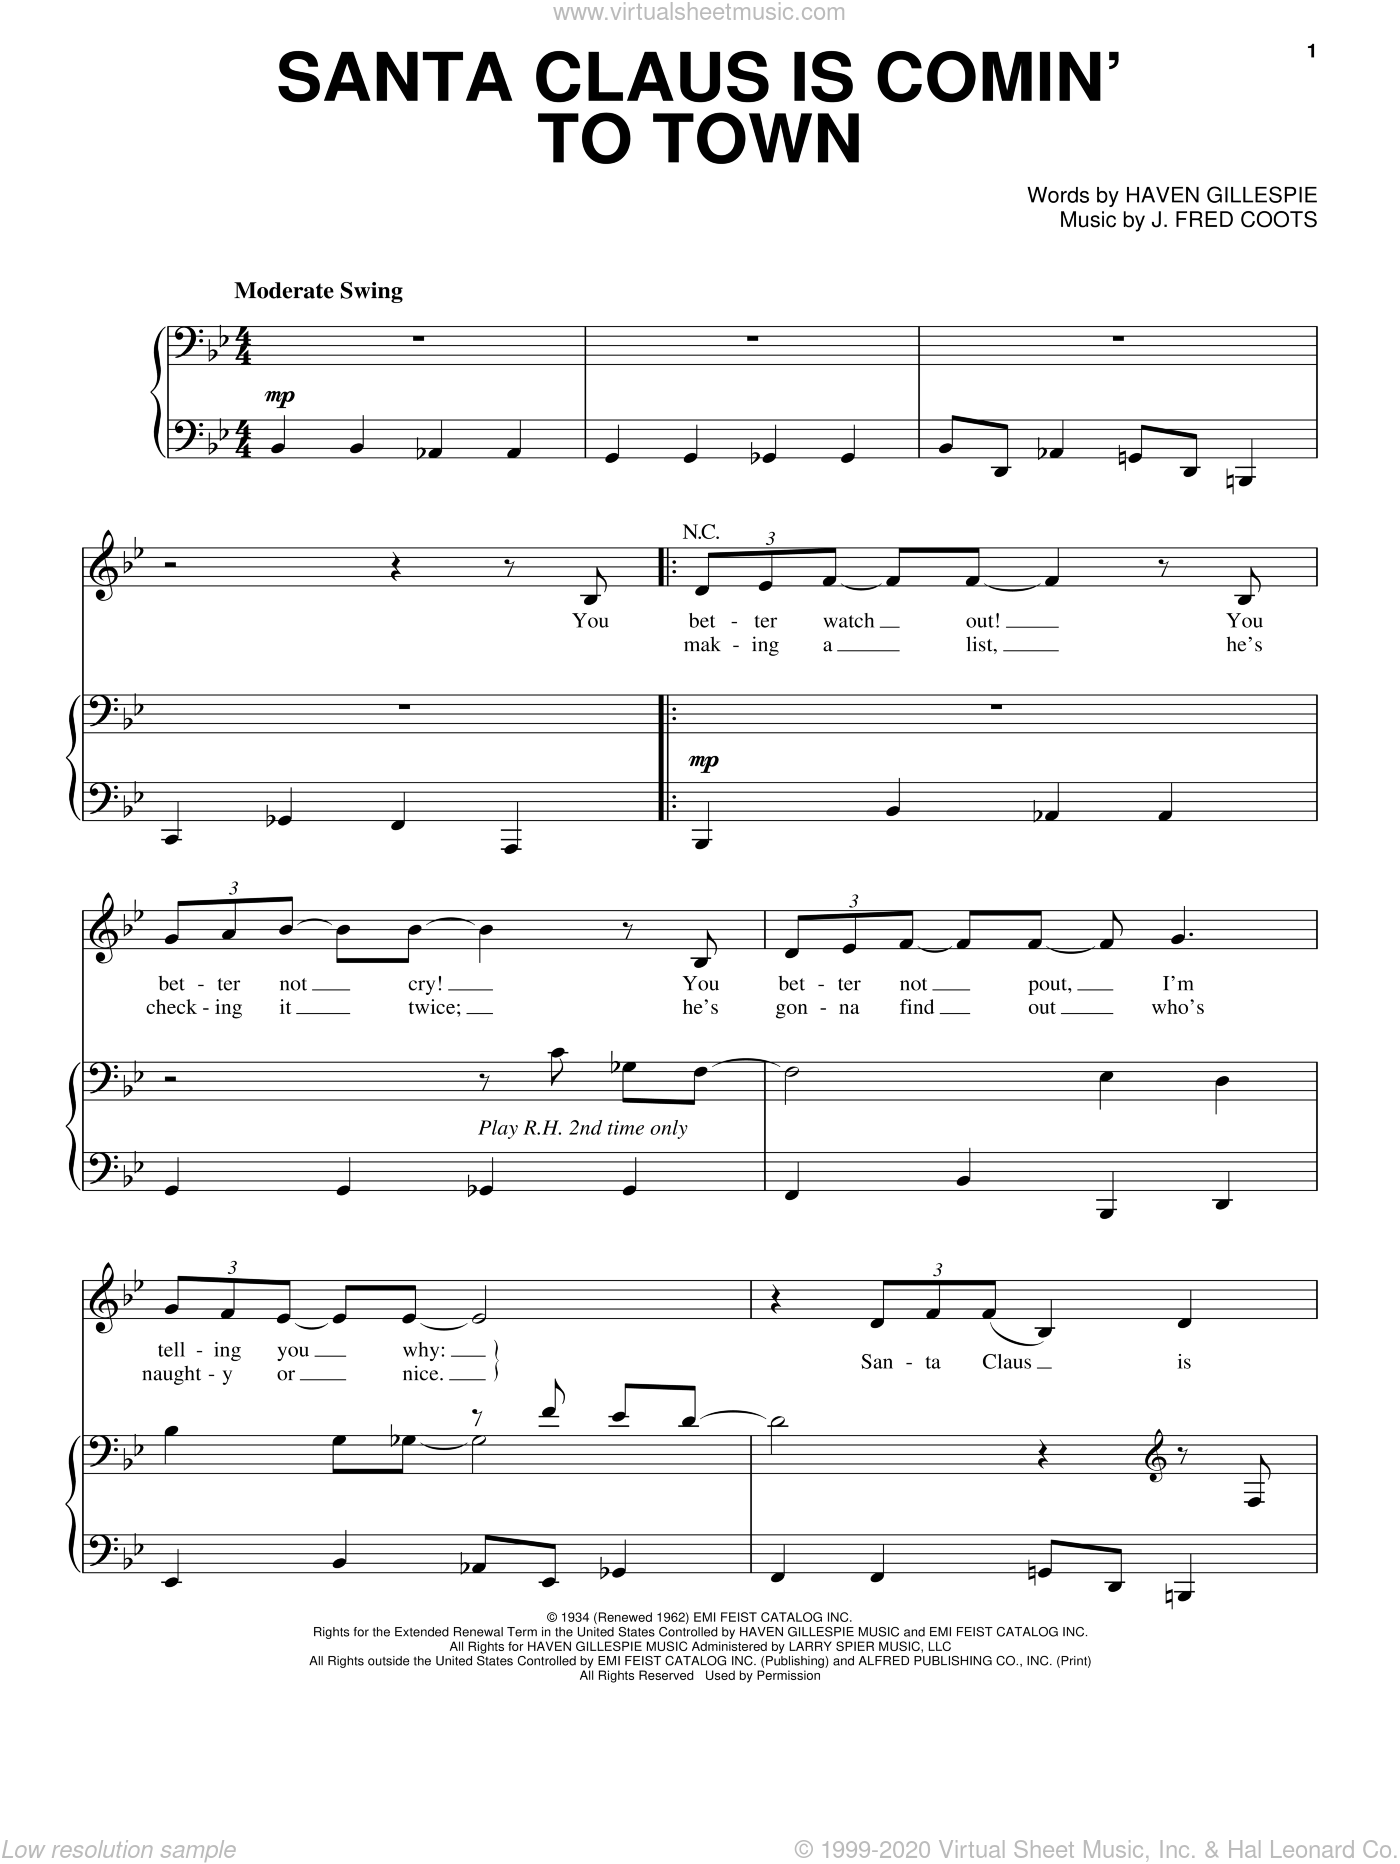 Buble - Santa Claus Is Comin' To Town sheet music for voice and piano